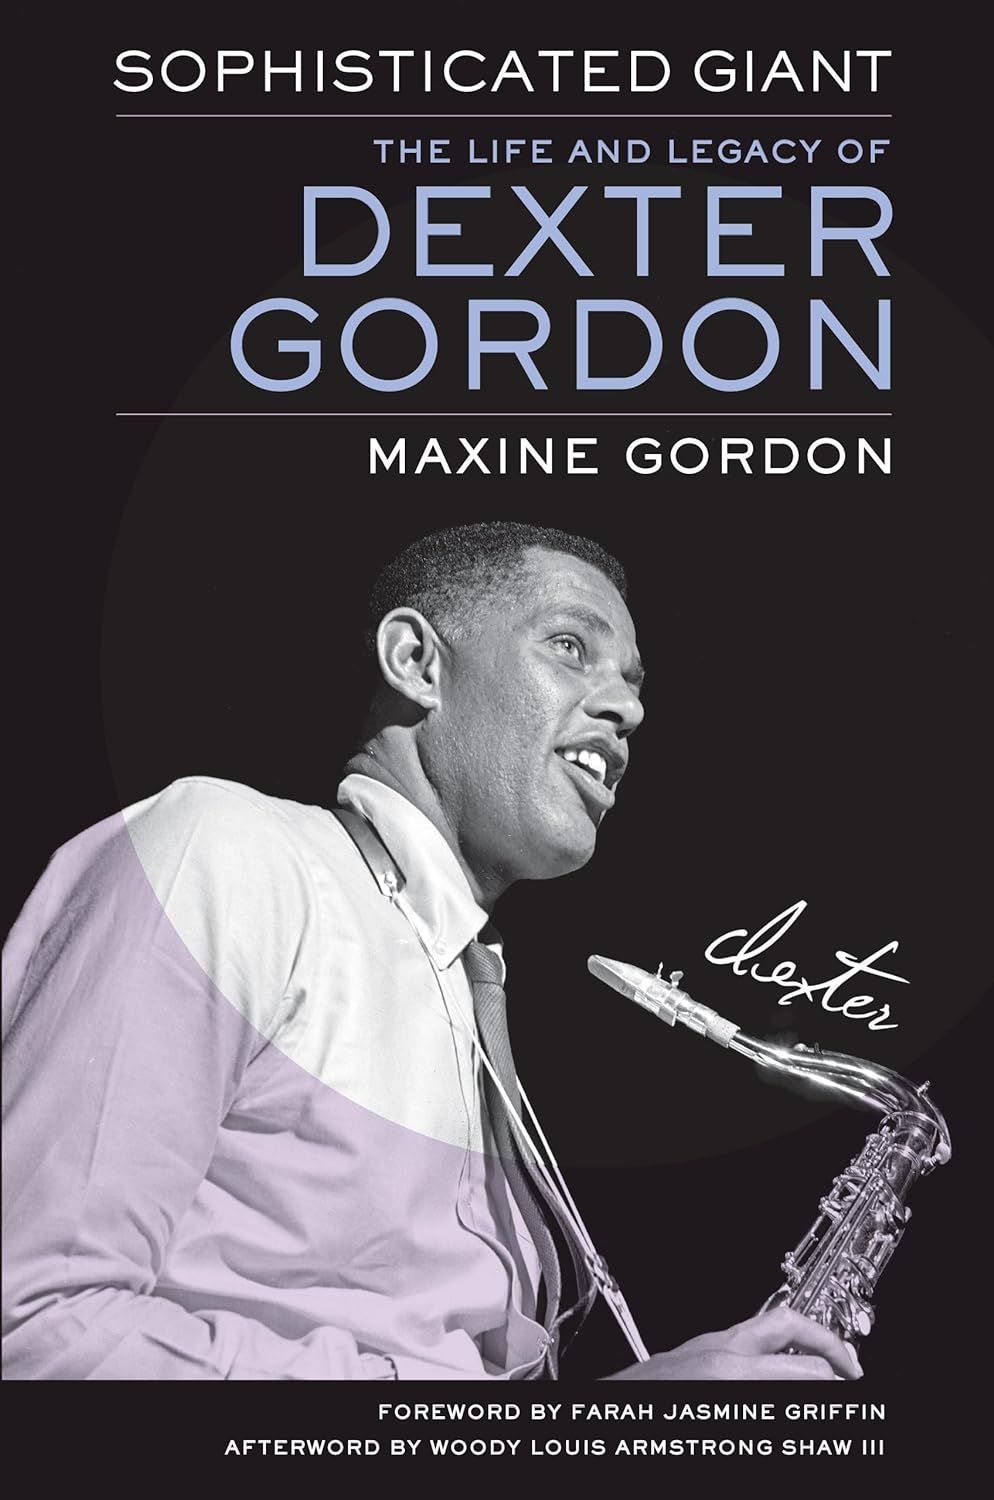 Soy Califa! On Dexter Gordon’s Life and Music